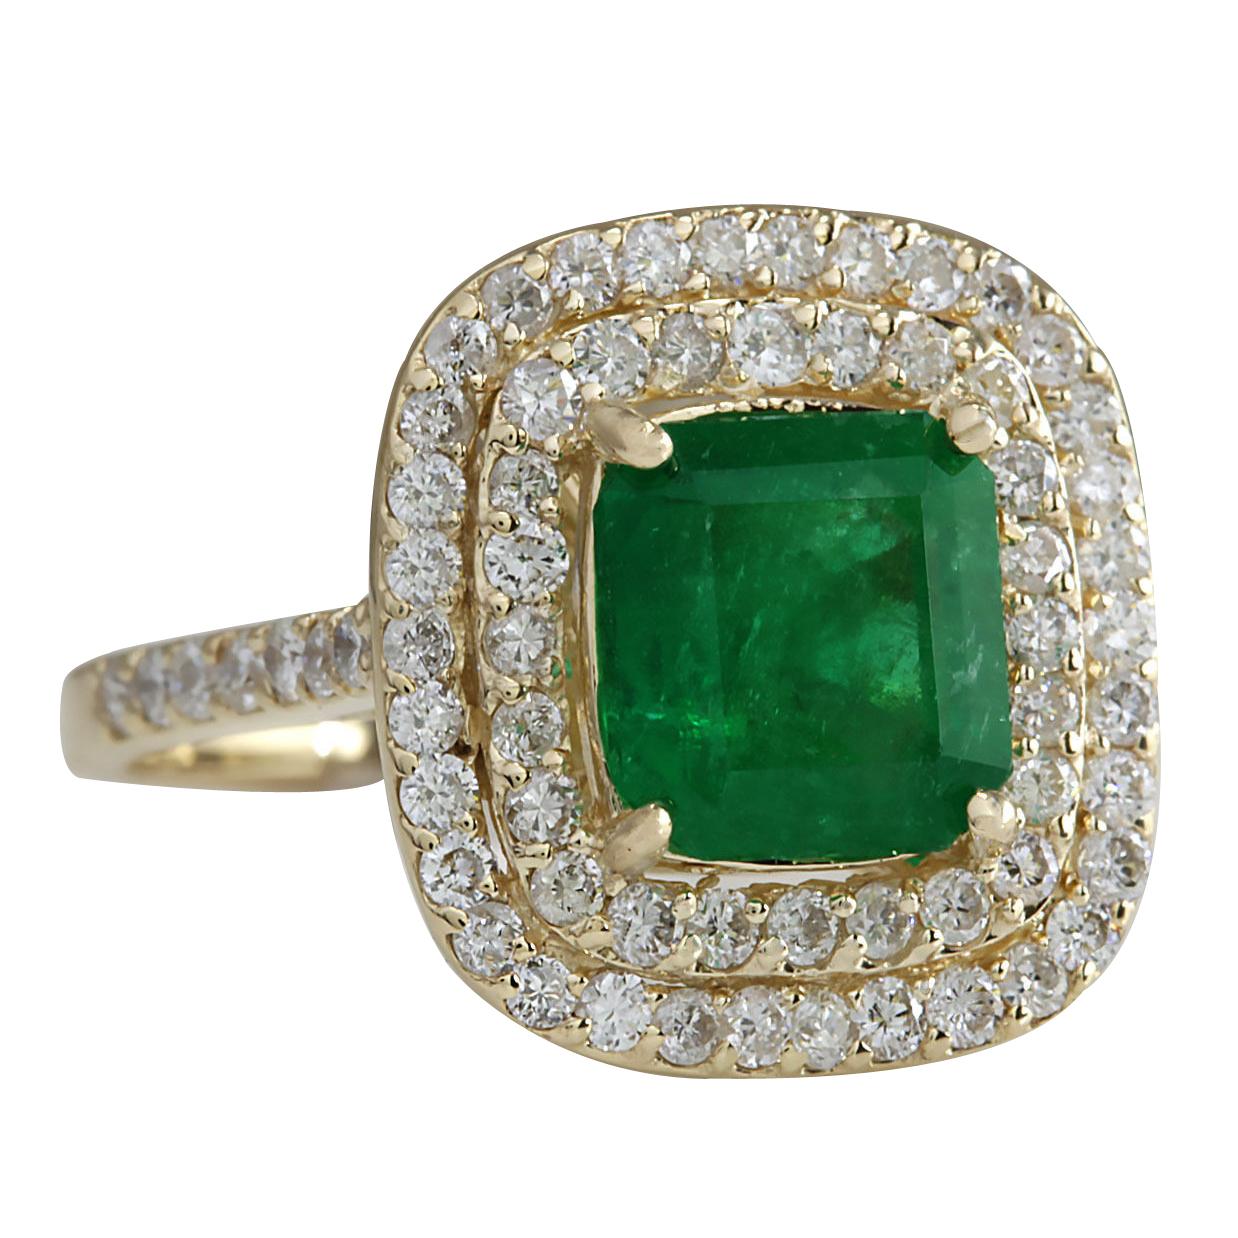 Stamped: 14K Yellow Gold
Total Ring Weight: 6.0 Grams
Total Natural Emerald Weight is 2.30 Carat (Measures: 8.00x8.00 mm)
Color: Green
Total Natural Diamond Weight is 1.20 Carat
Color: F-G, Clarity: VS2-SI1
Face Measures: 16.90x15.70 mm
Sku: